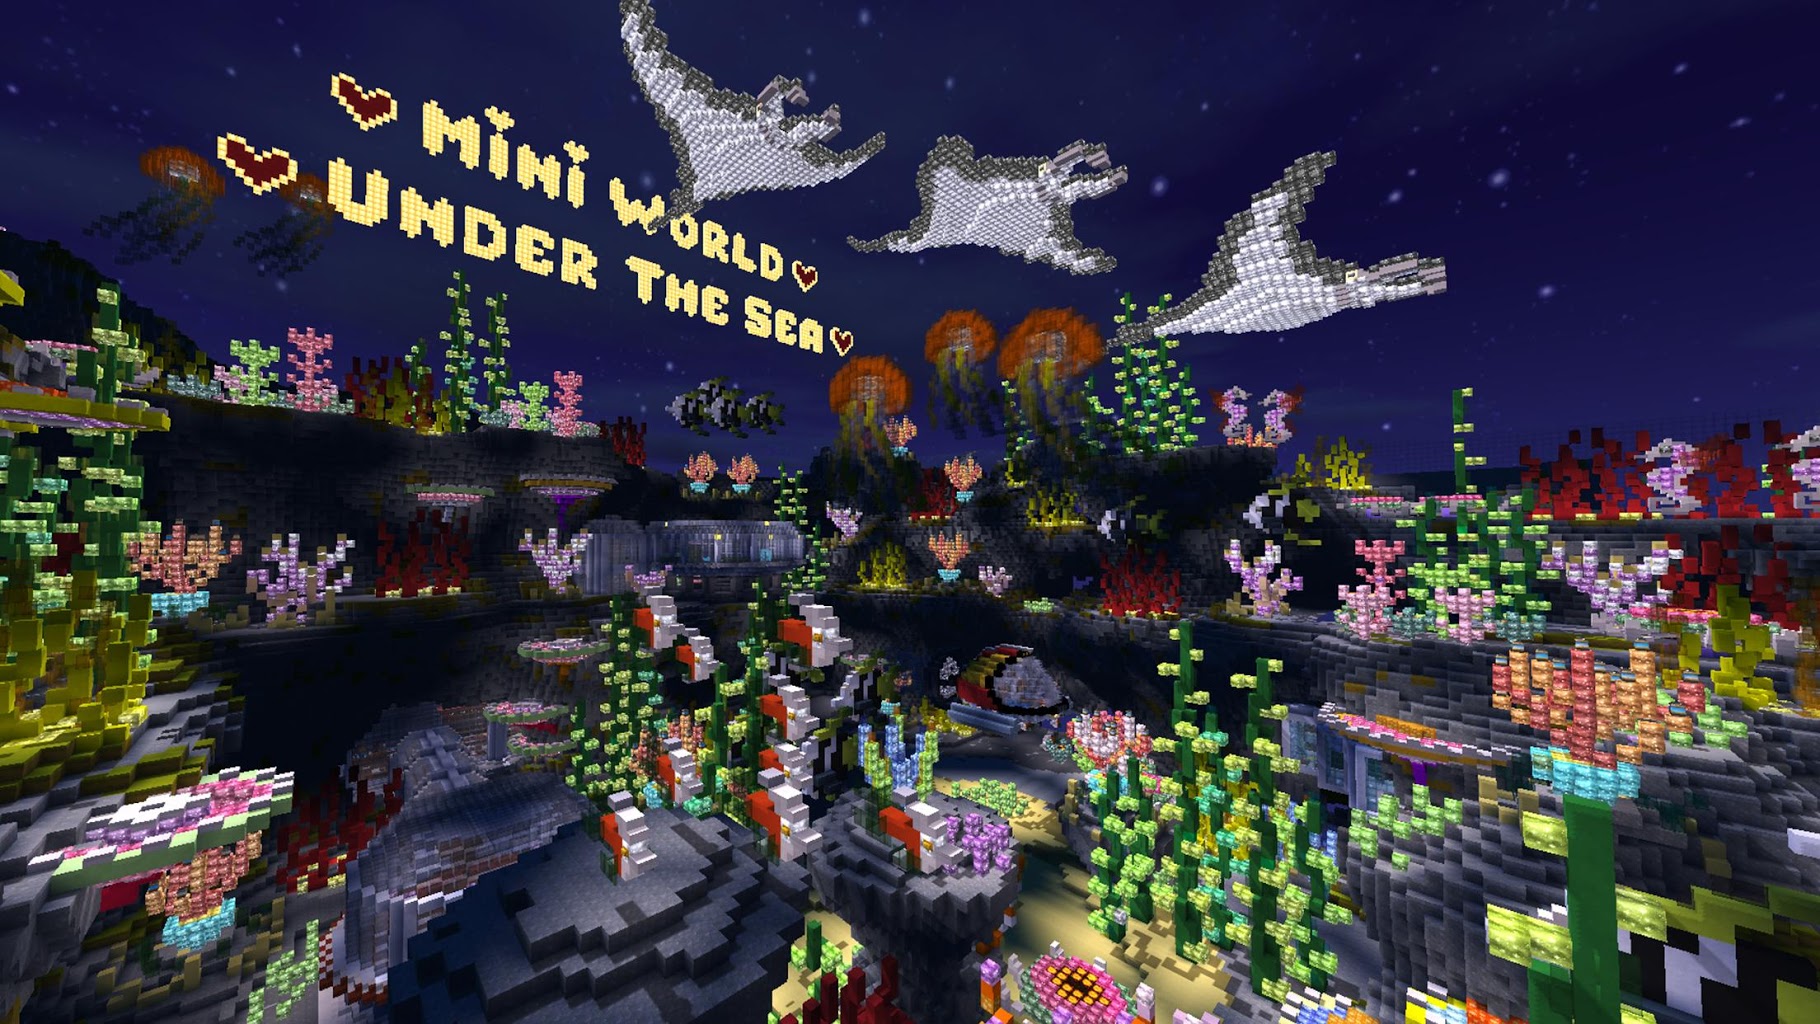 Download Mini World MOD APK V1.2.17 (Unlimited Money) Free For Android